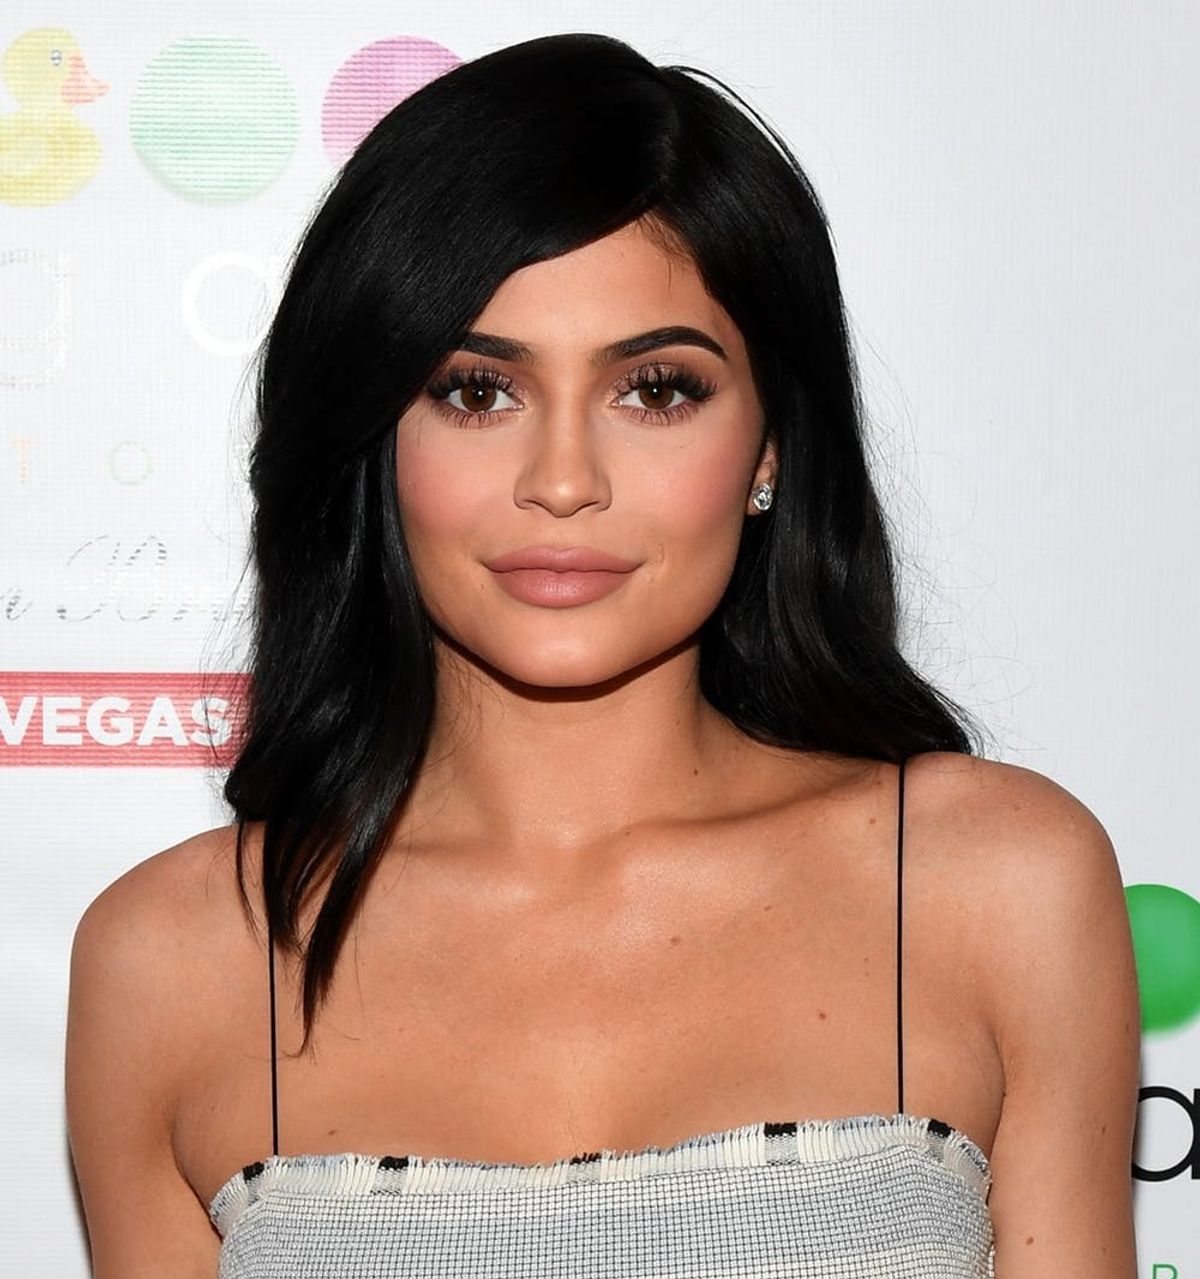 Kylie Jenner Reveals Her Baby Daughter’s Name and Shares a Sweet New Photo!